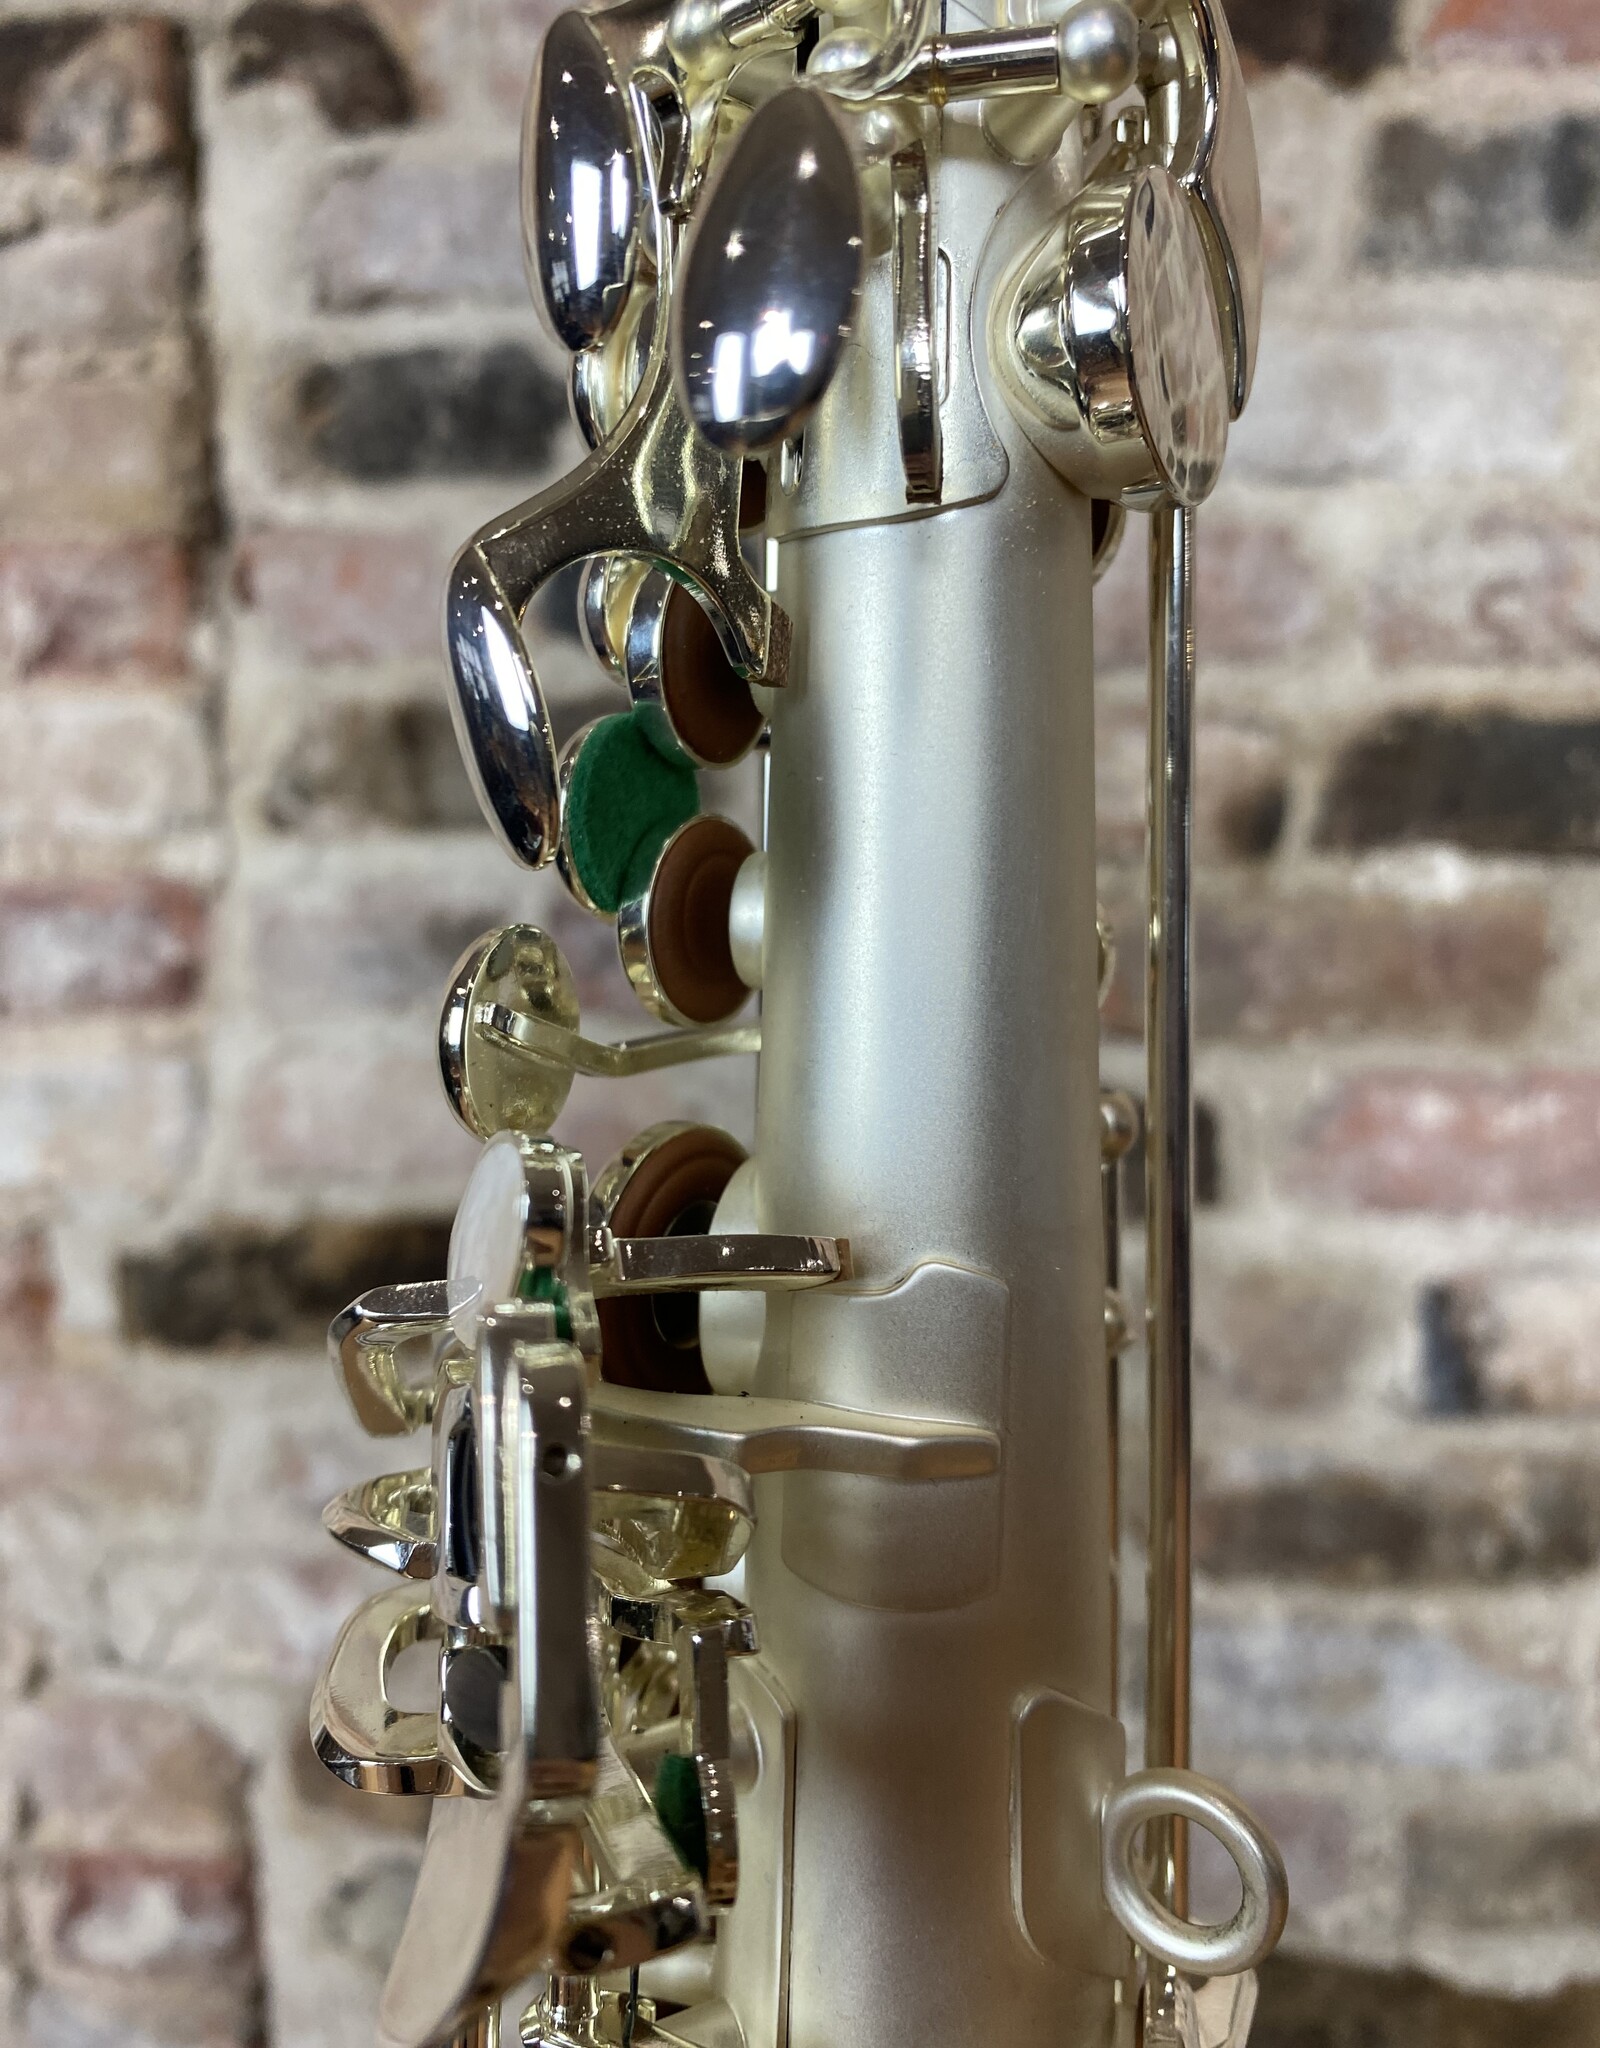 JL Woodwinds Artist Edition New York Signature Soprano Saxophone Matte Silver Plated *Limited Edition*